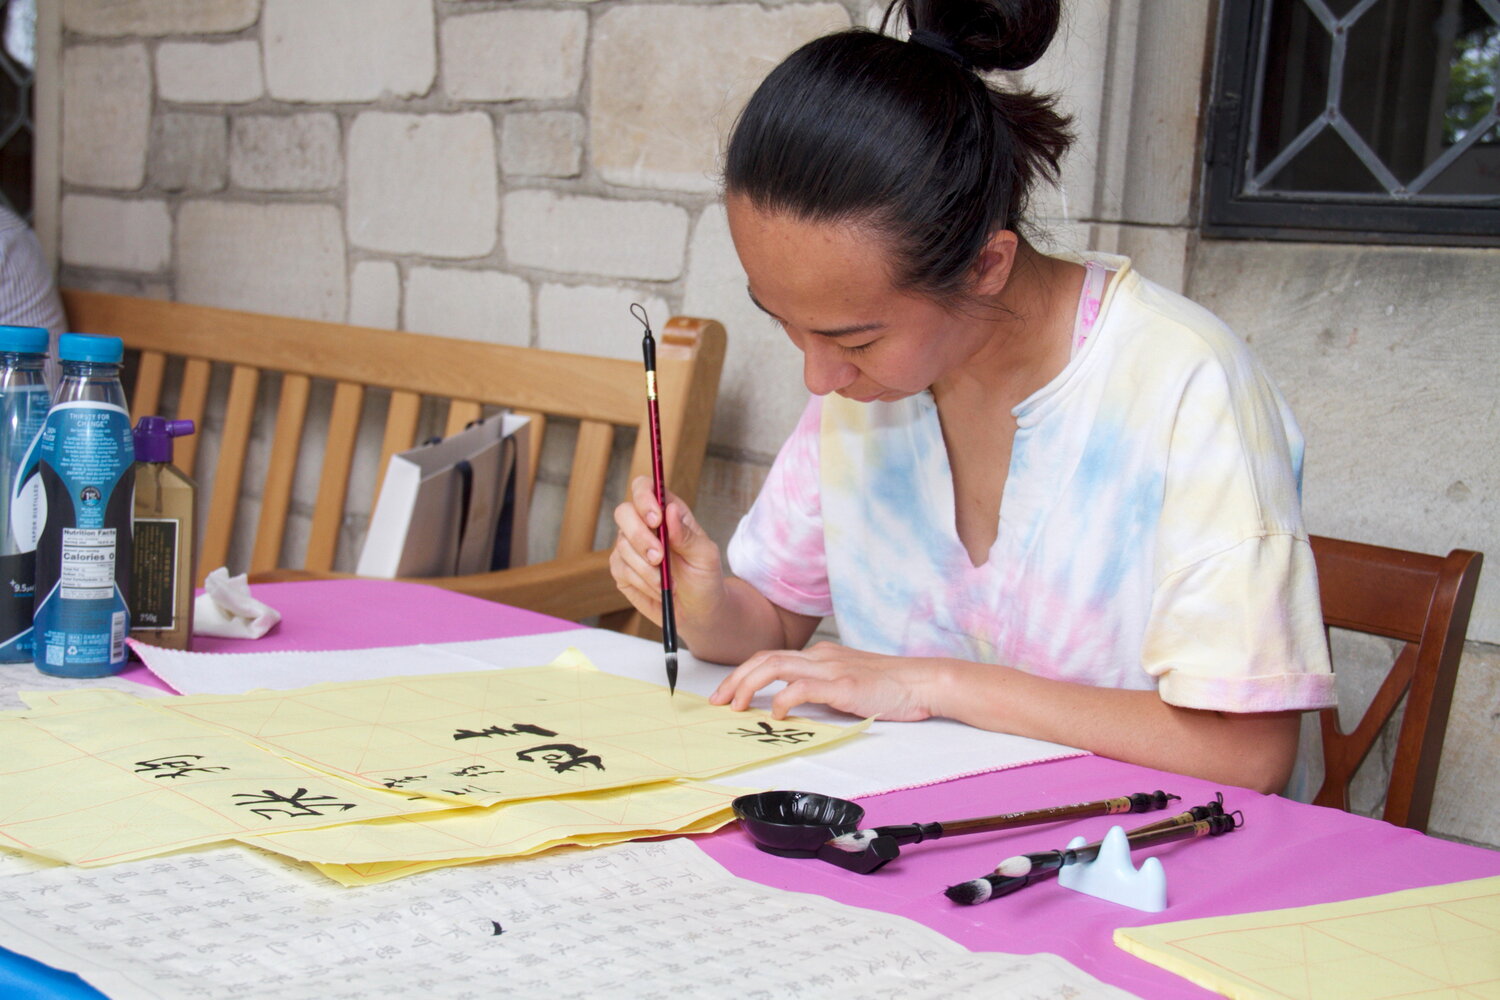 Attendees like Fan Casey took calligraphy lessons at the festival.